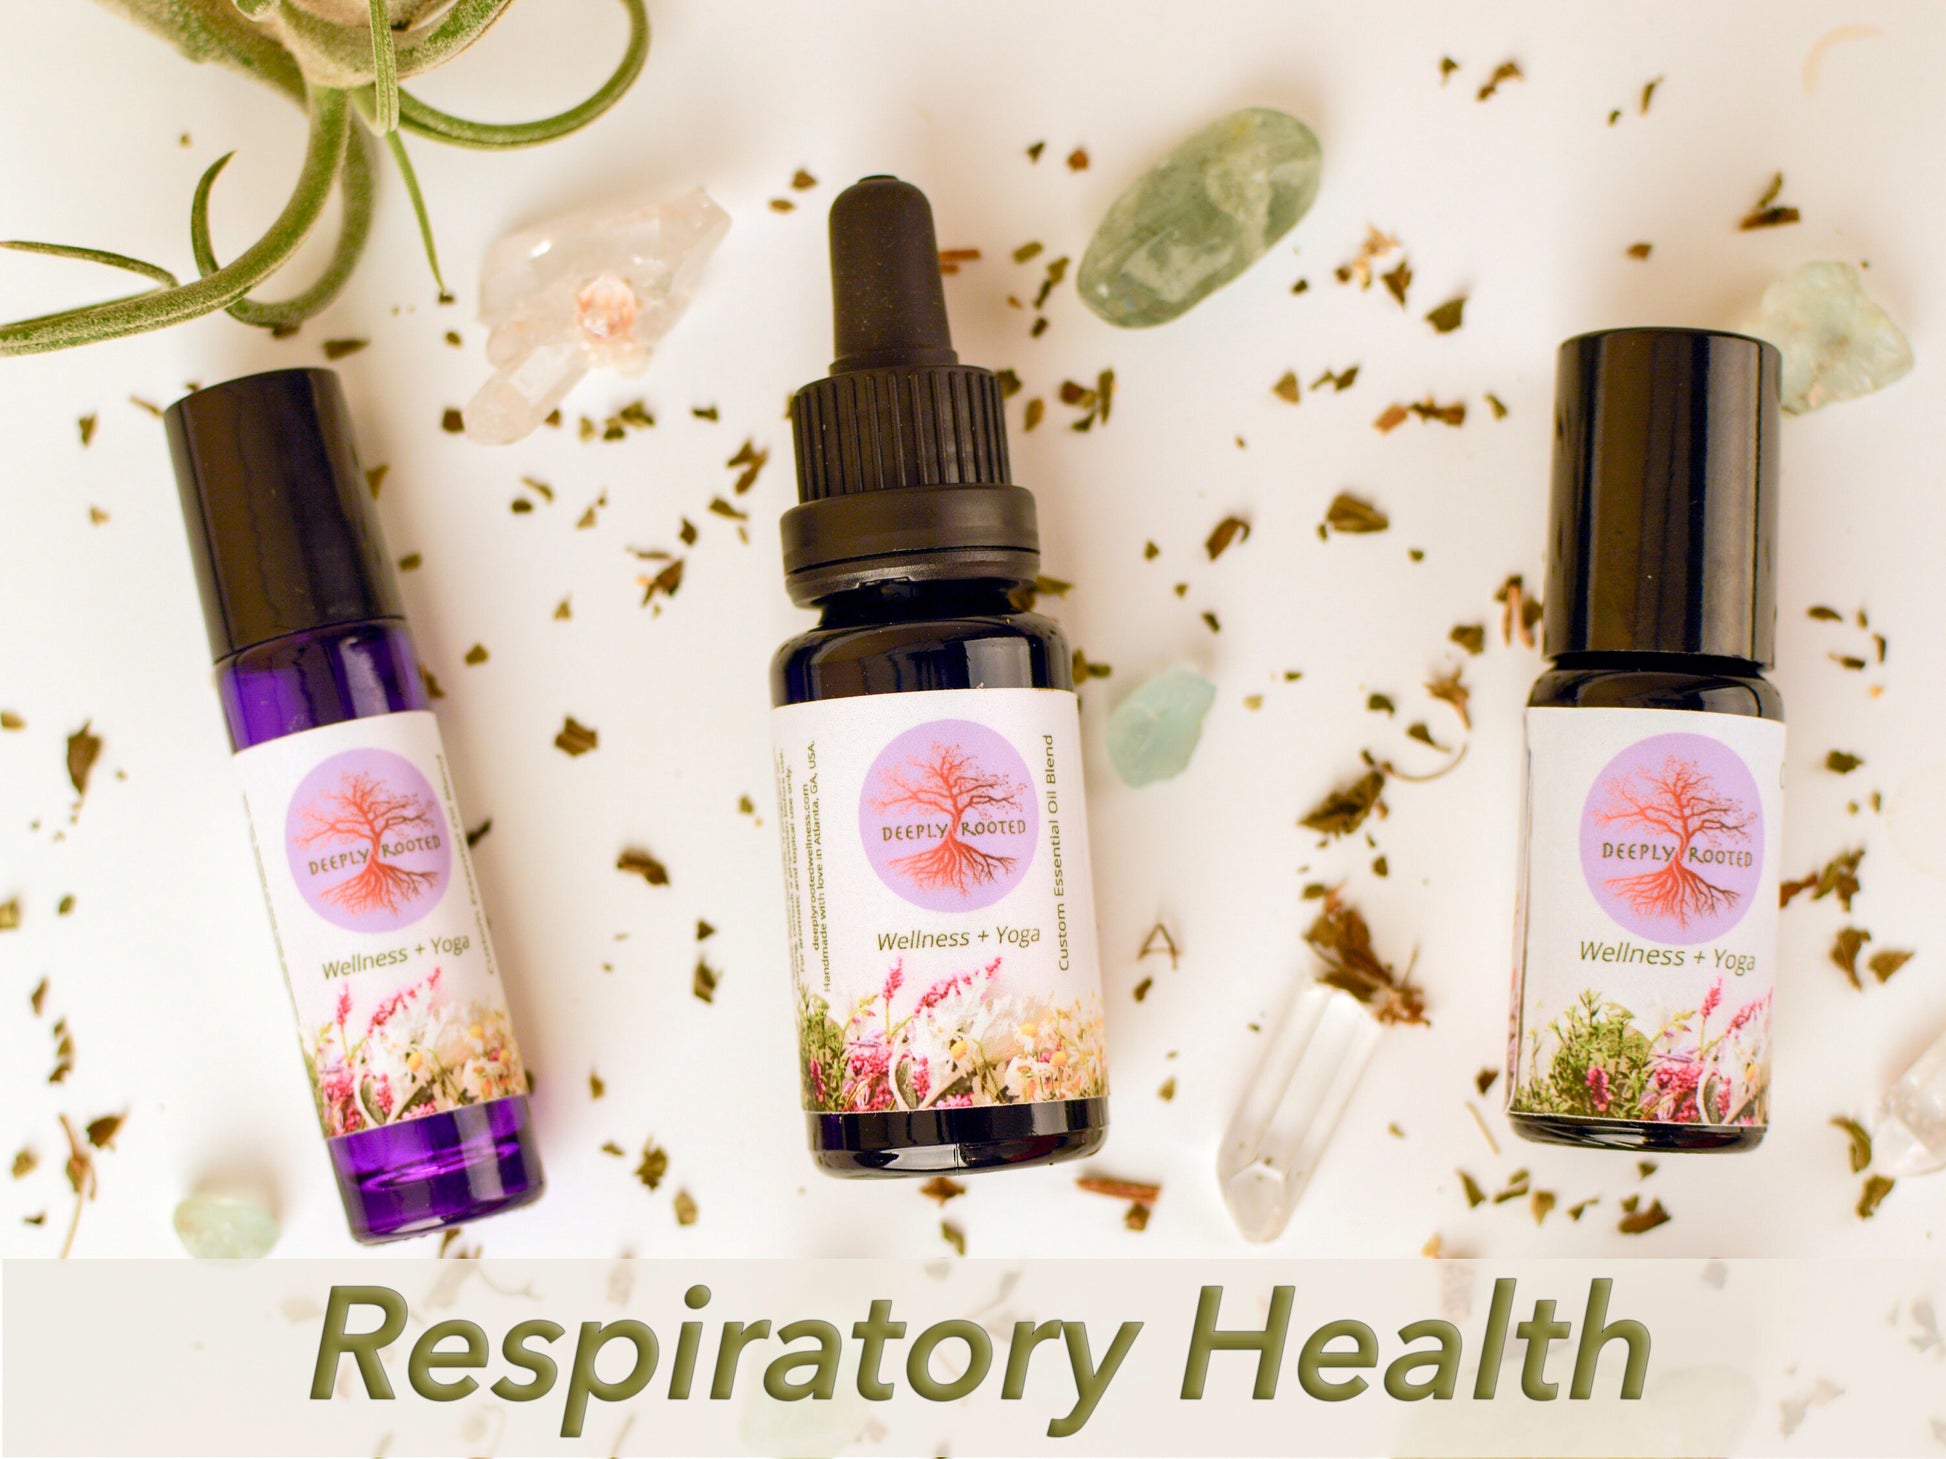 Rescue Respiratory Infection Blend, Essential Oils Deeply Rooted Yoga + Wellness